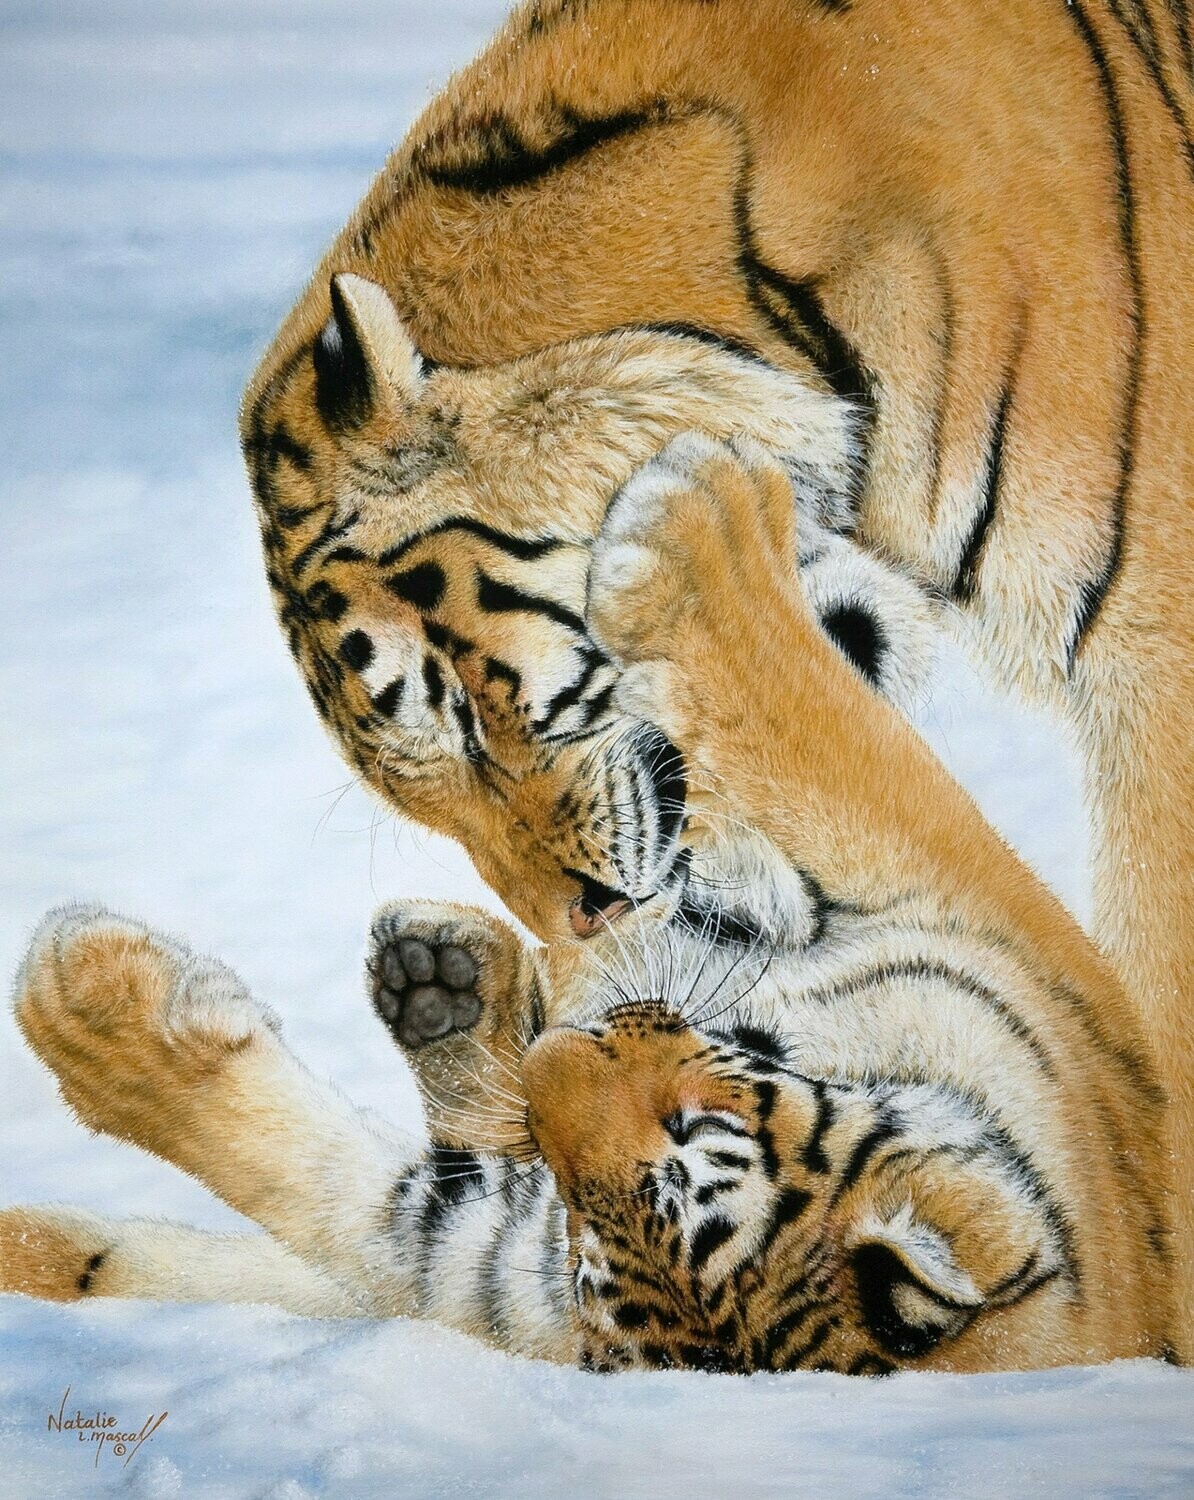 'Tigers at Play' is an Open edition giclee fine art print of tigers playing in the snow by Natalie Mascall ©